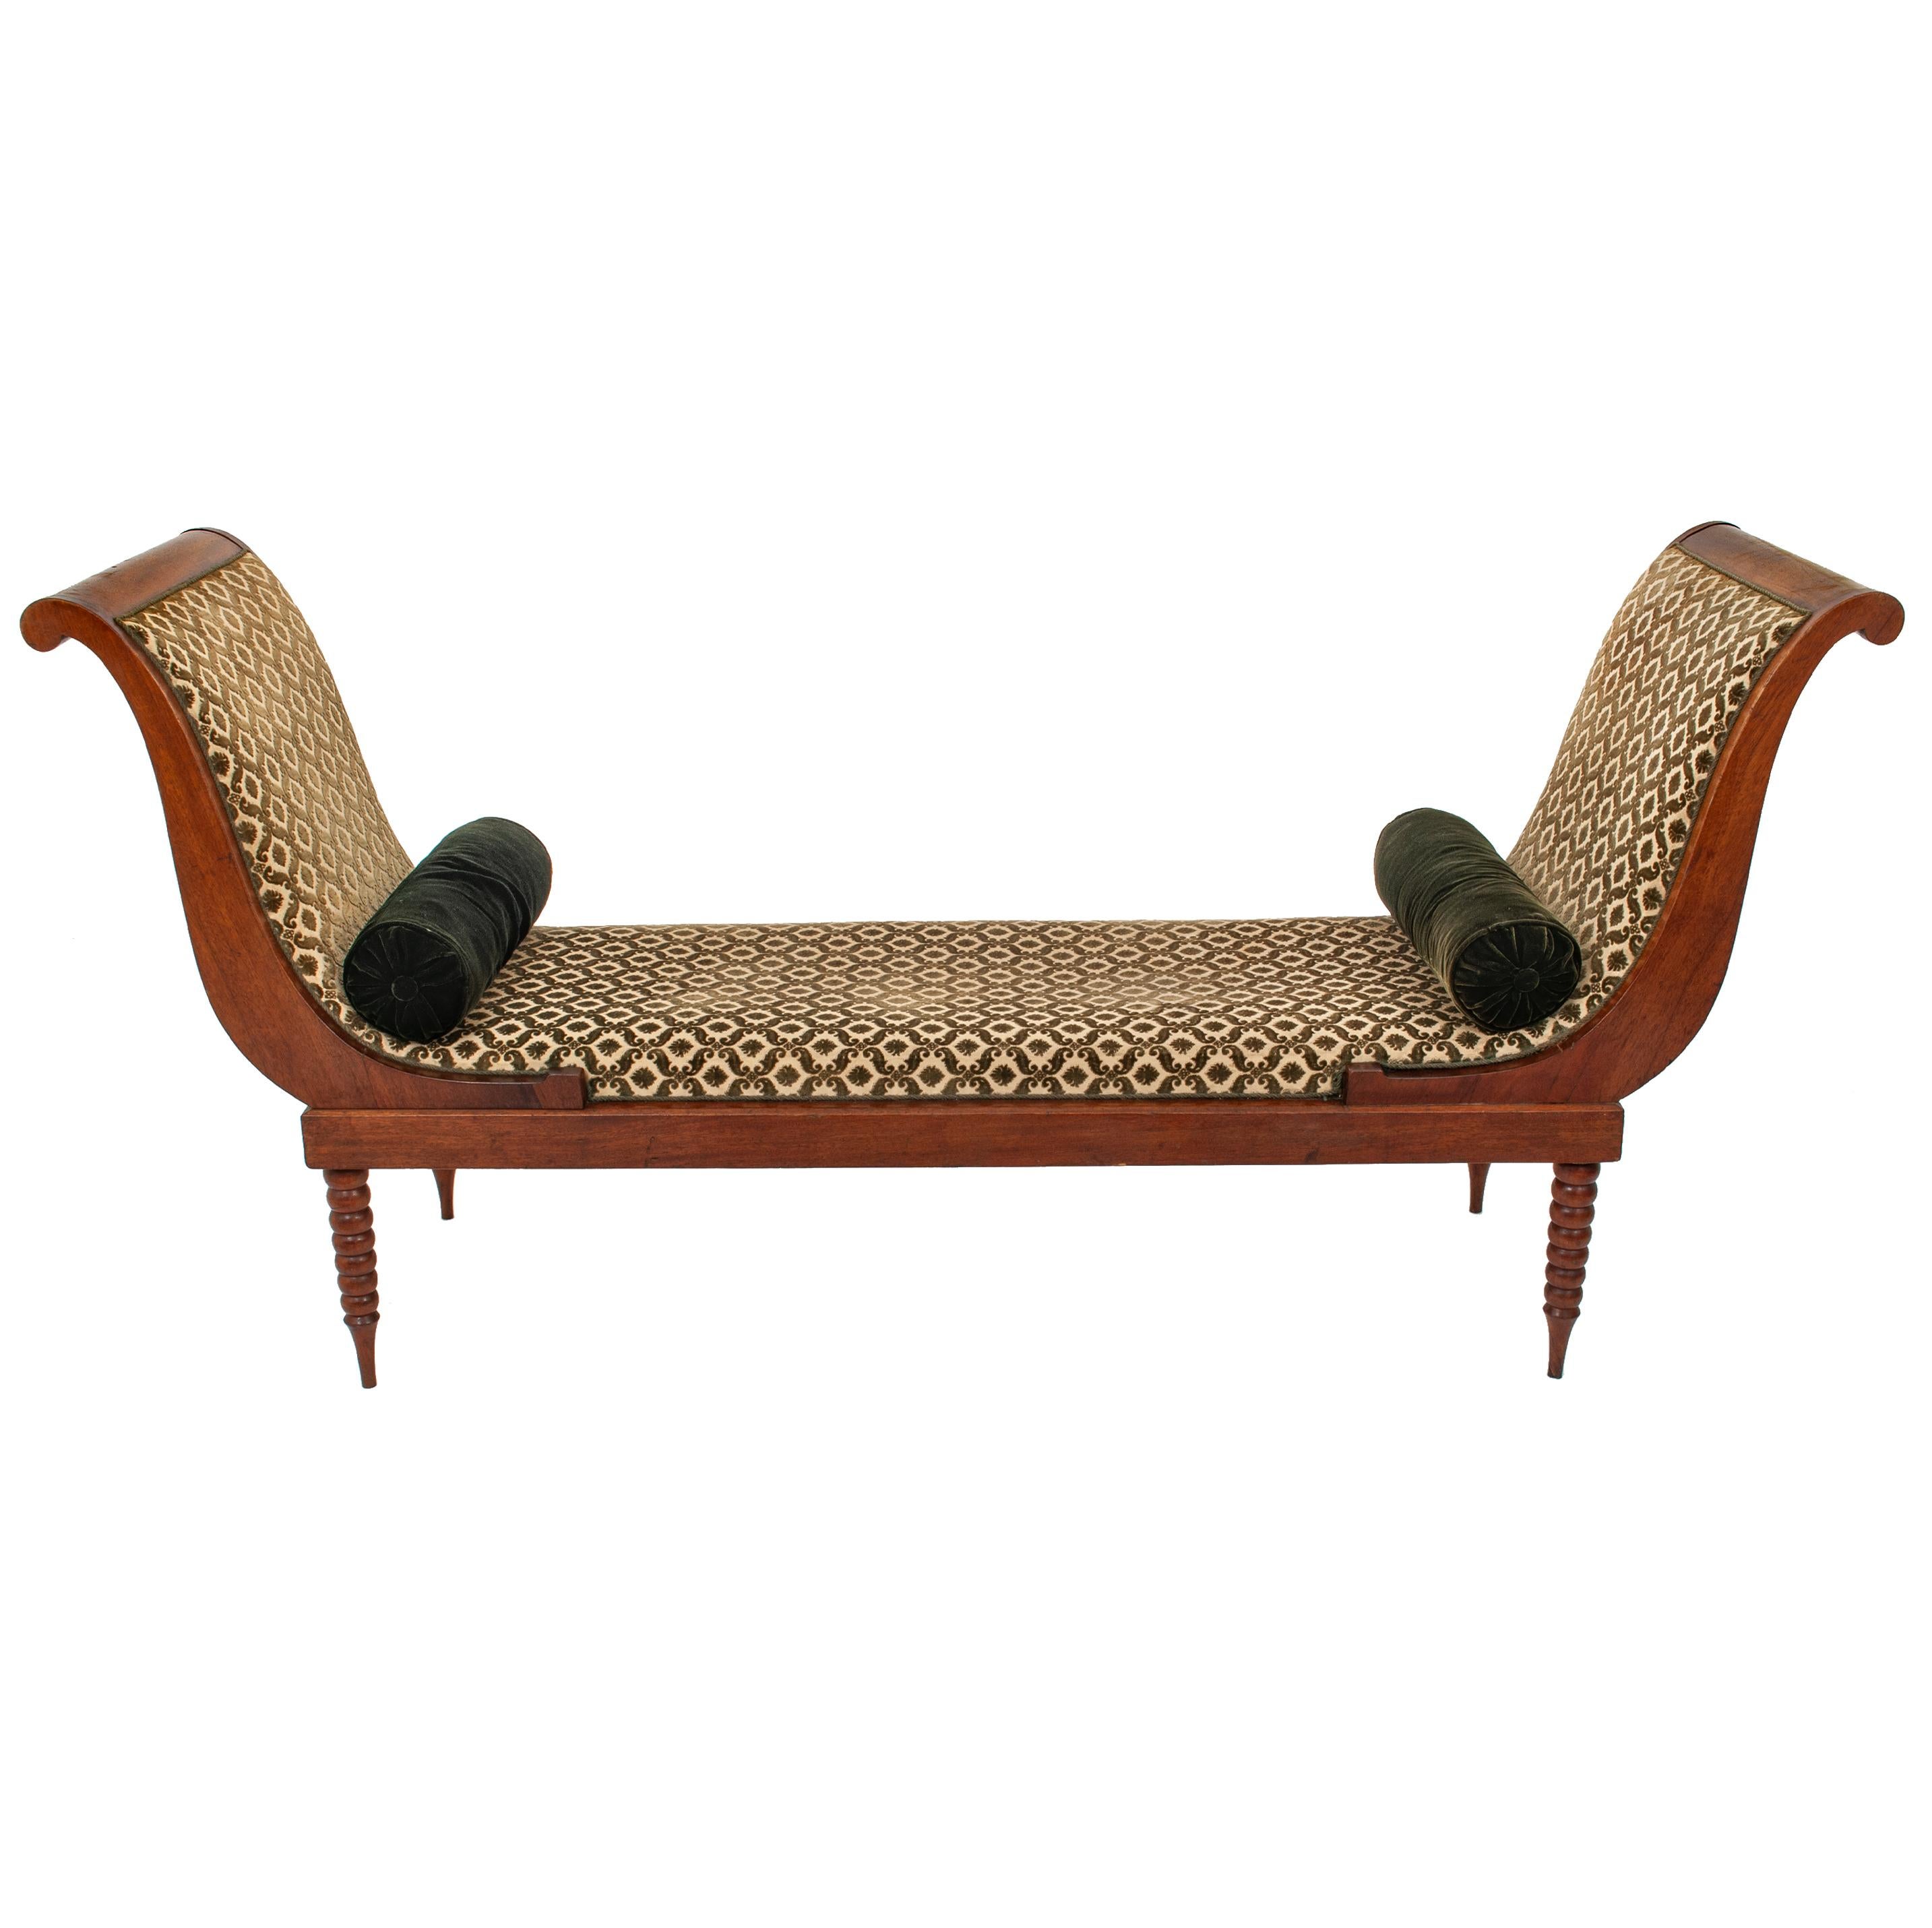 A good antique American Neoclassical mahogany bustle bench, window seat, daybed, circa 1860.
The bench having out-swept ends with a curvilinear design and upholstered in a high quality embossed velvet and raised on tapering bobbin legs.
The bench is